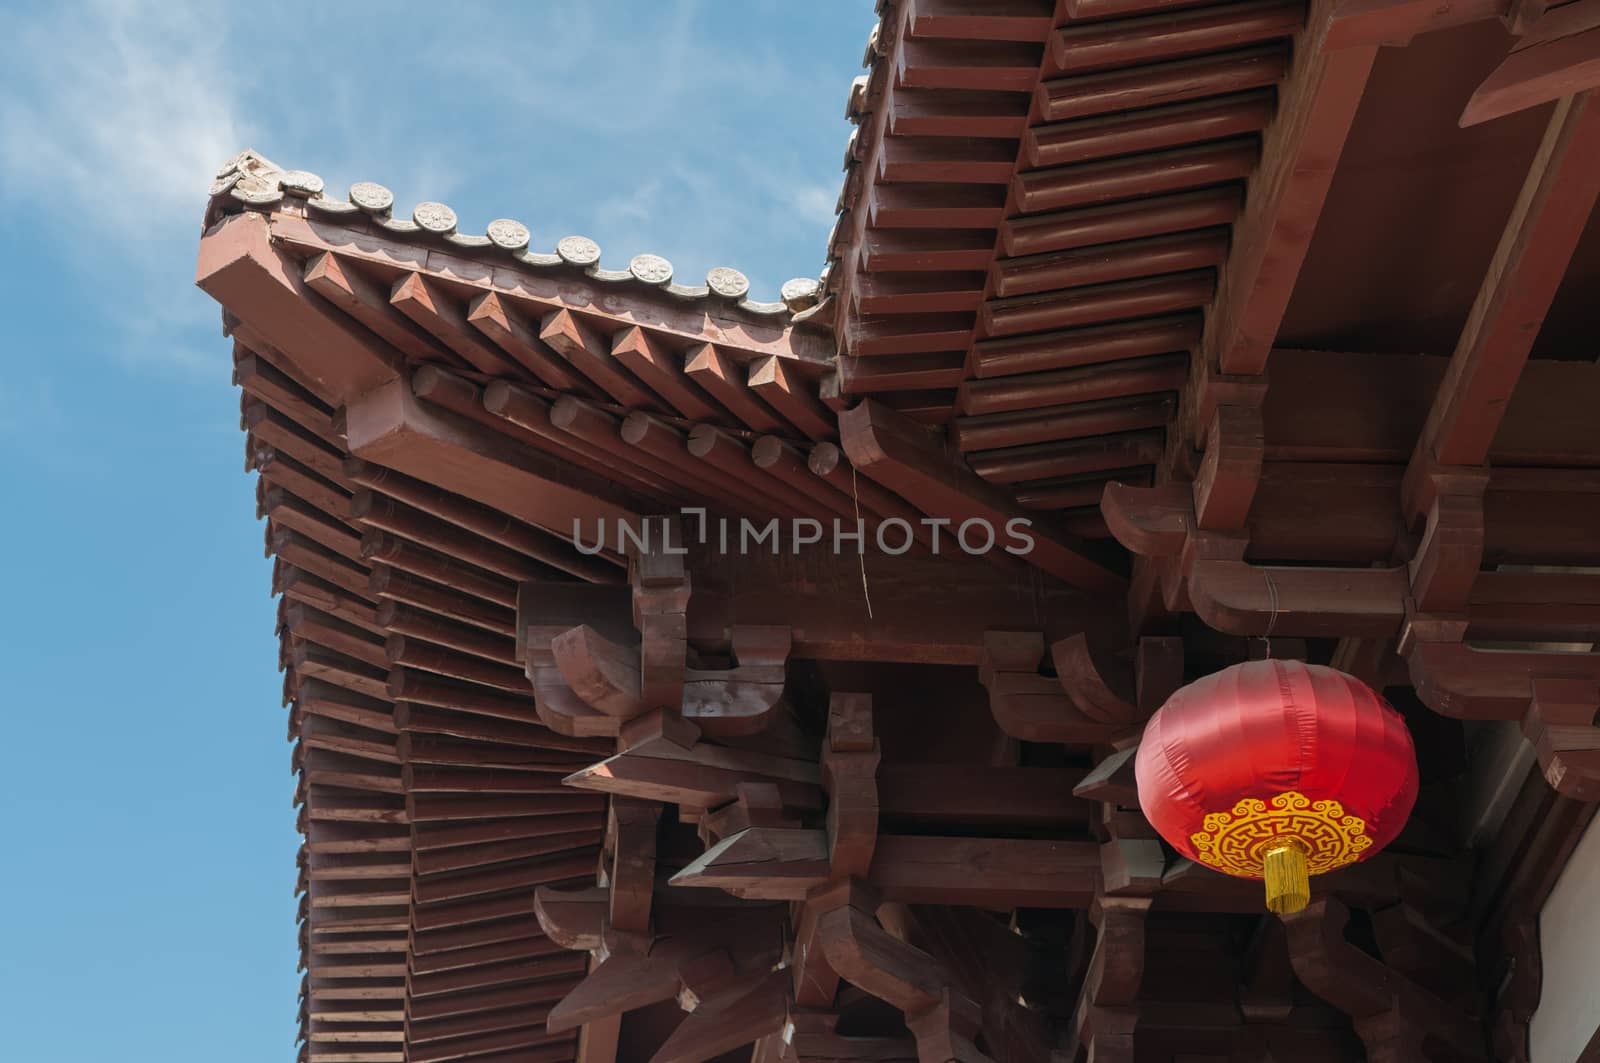 The horizontal view of the Chinese lantern on the roof